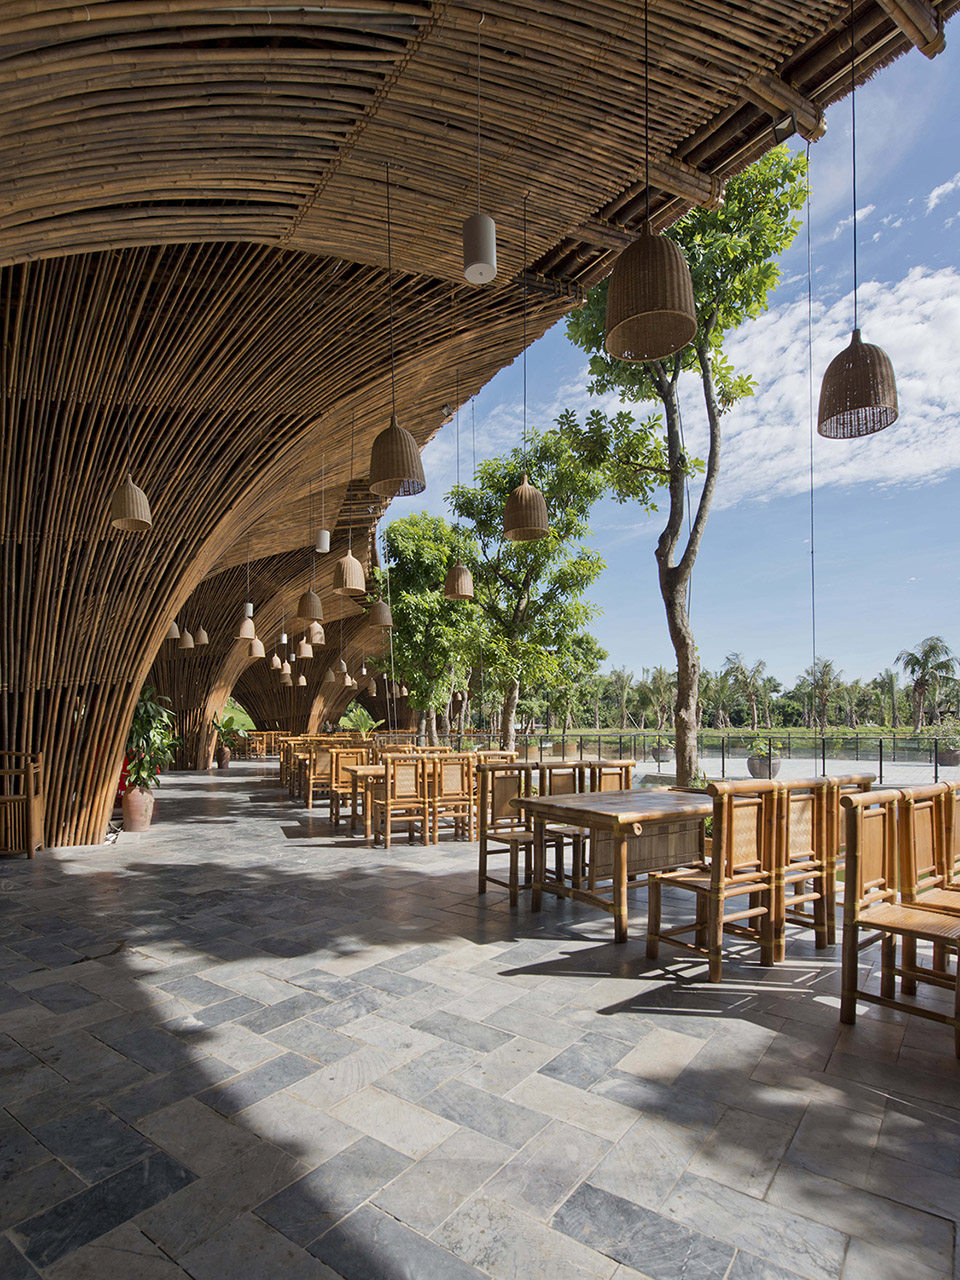 007-Roc-Von-Restaurant-by-Vo-Trong-Nghia-Architects.jpg